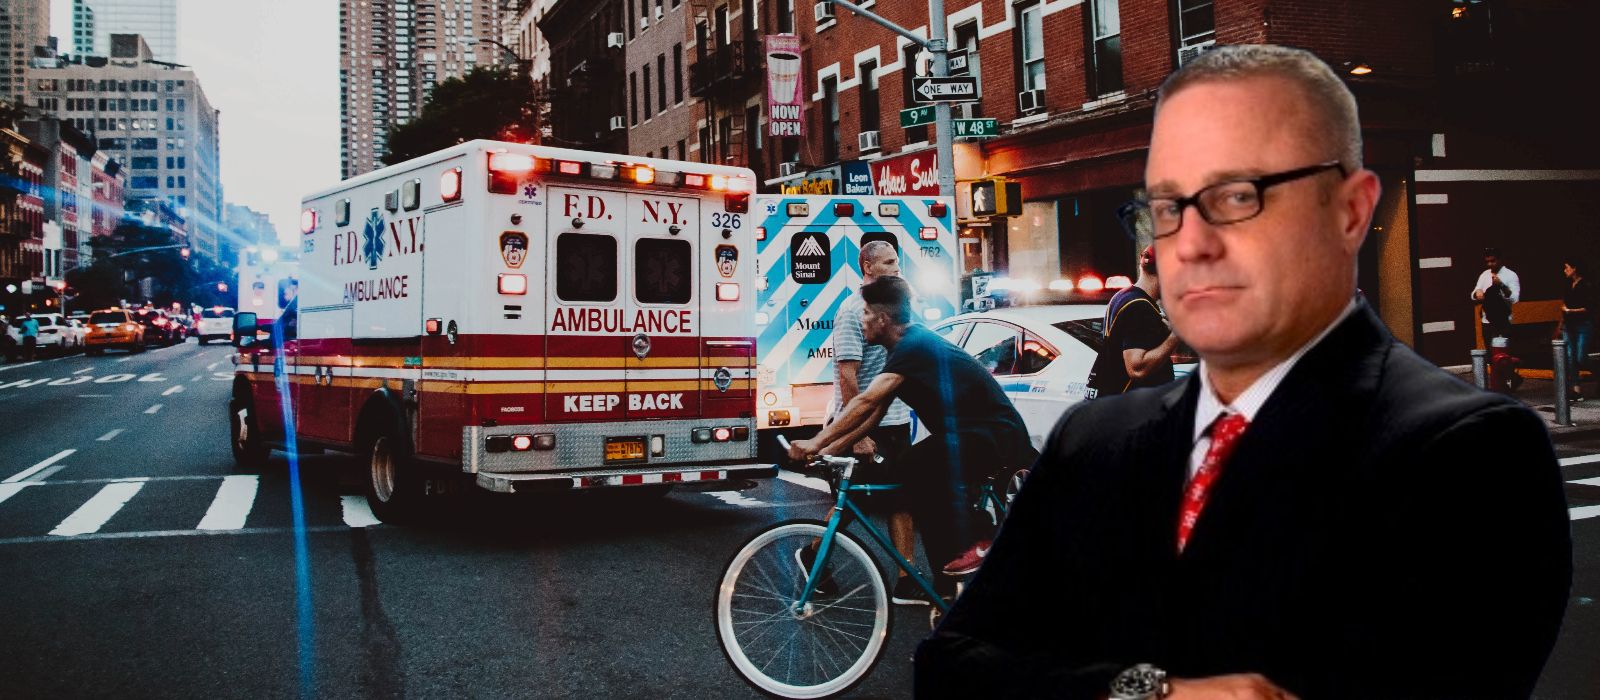 Why Hiring a California Ambulance Chaser is Bad for Your Health